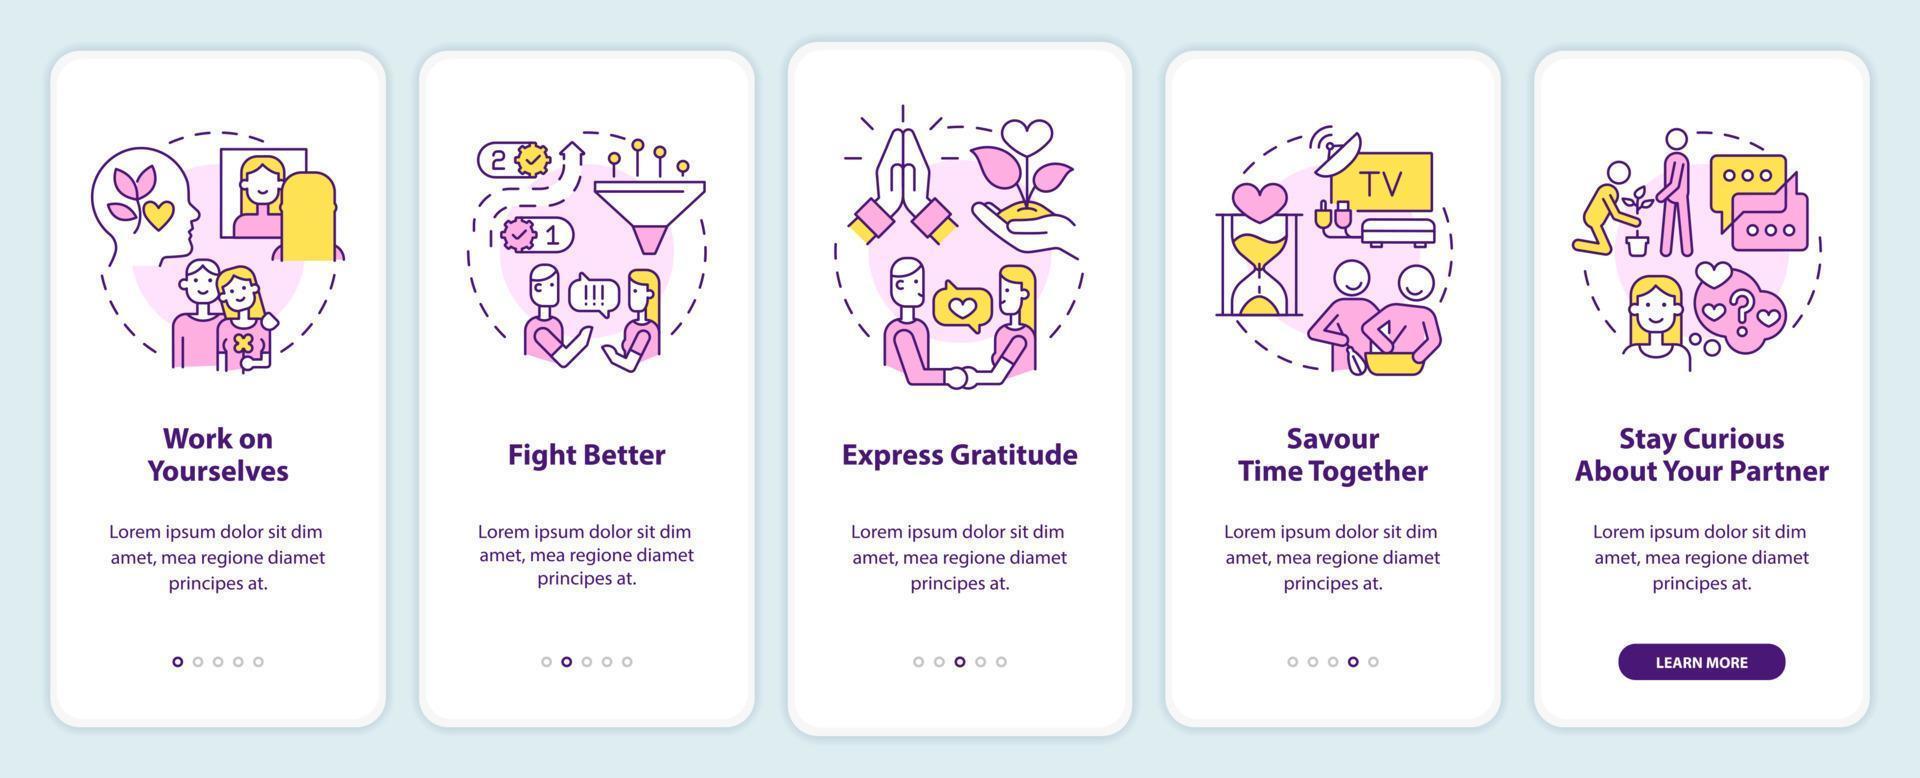 How to save relationship onboarding mobile app screen. Fight better walkthrough 5 steps editable graphic instructions with linear concepts. UI, UX, GUI template. vector